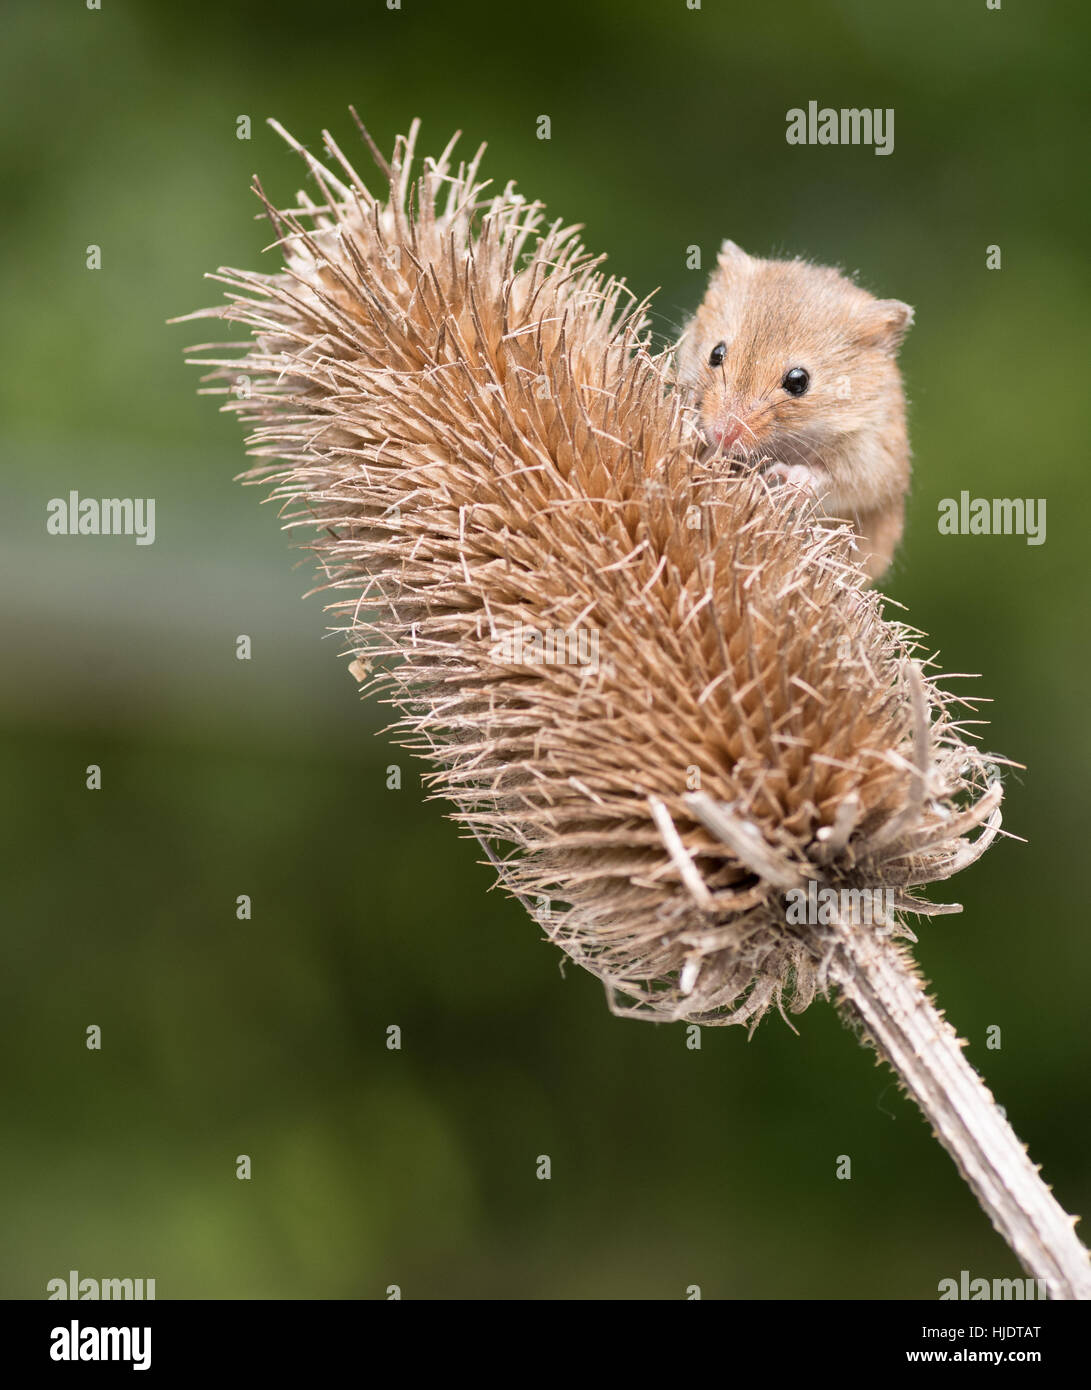 Harvest Mouse on Teasel Stock Photo